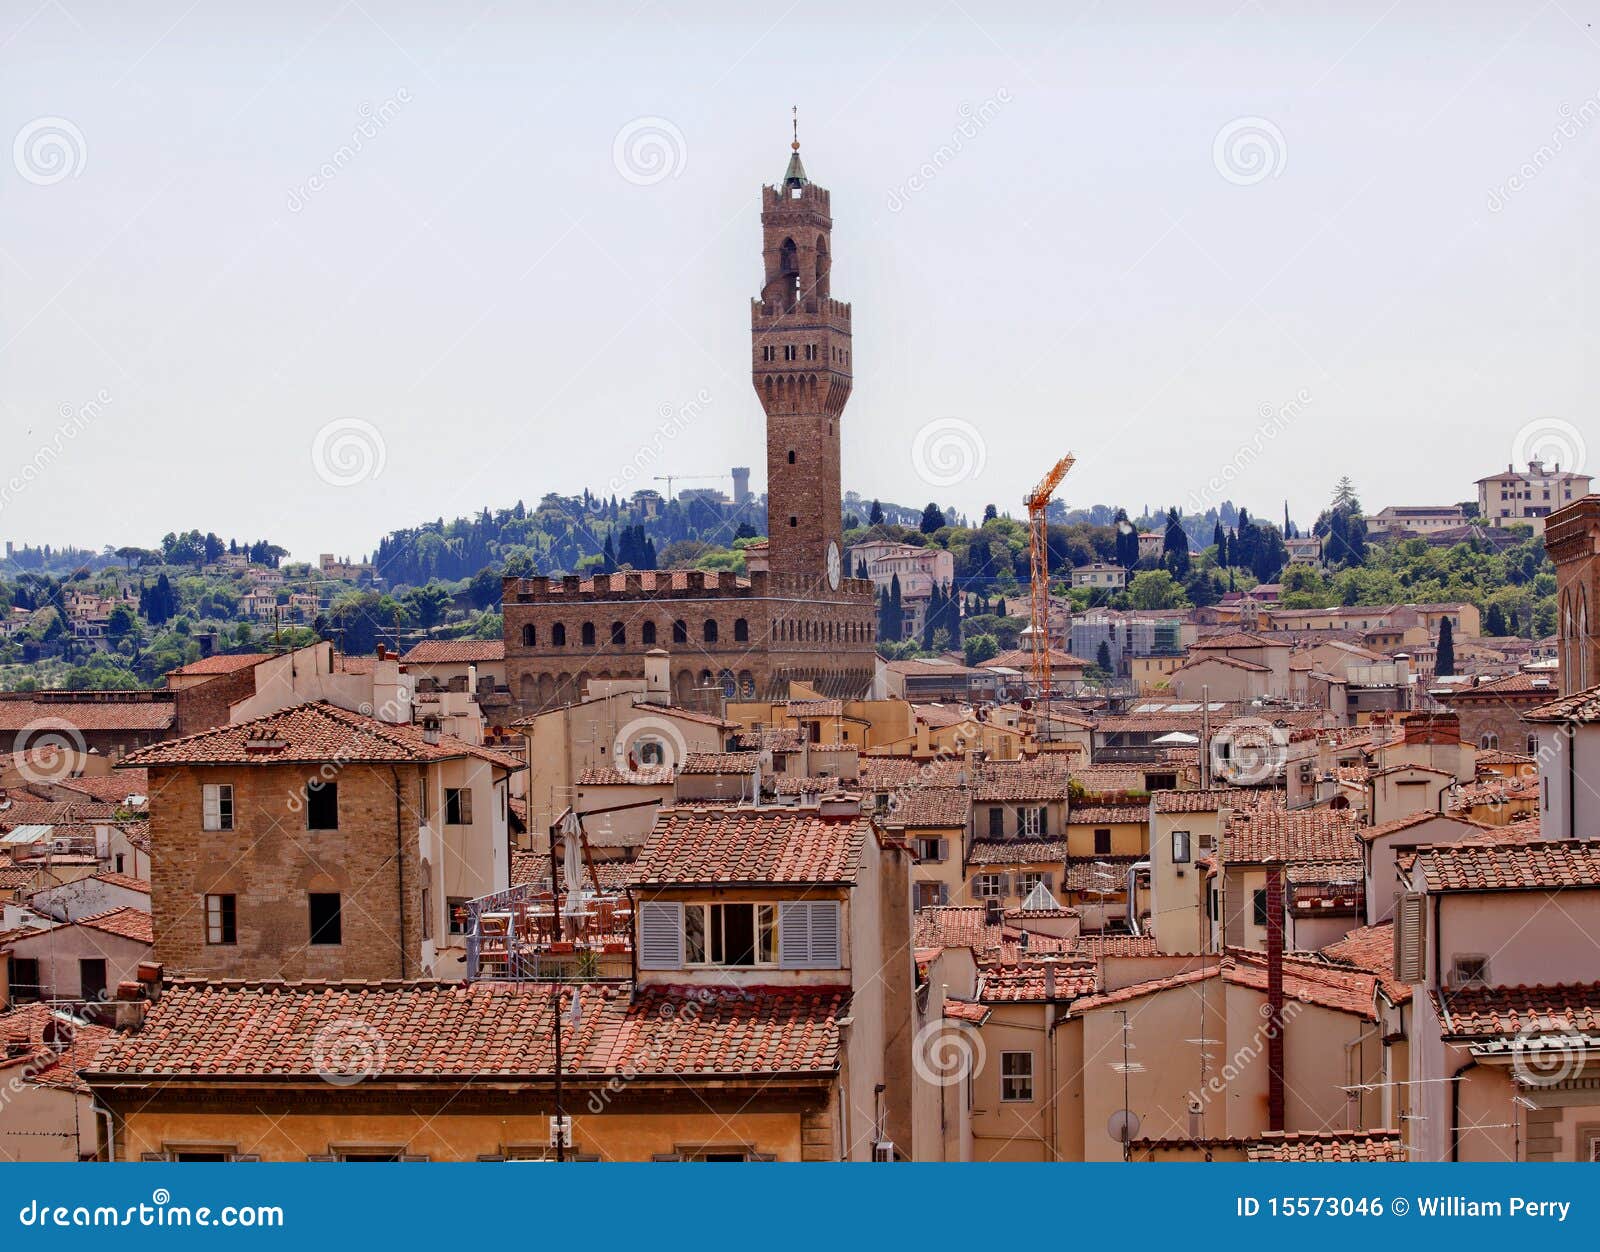 palazzo vecchio arnolfo tower florence rooftops